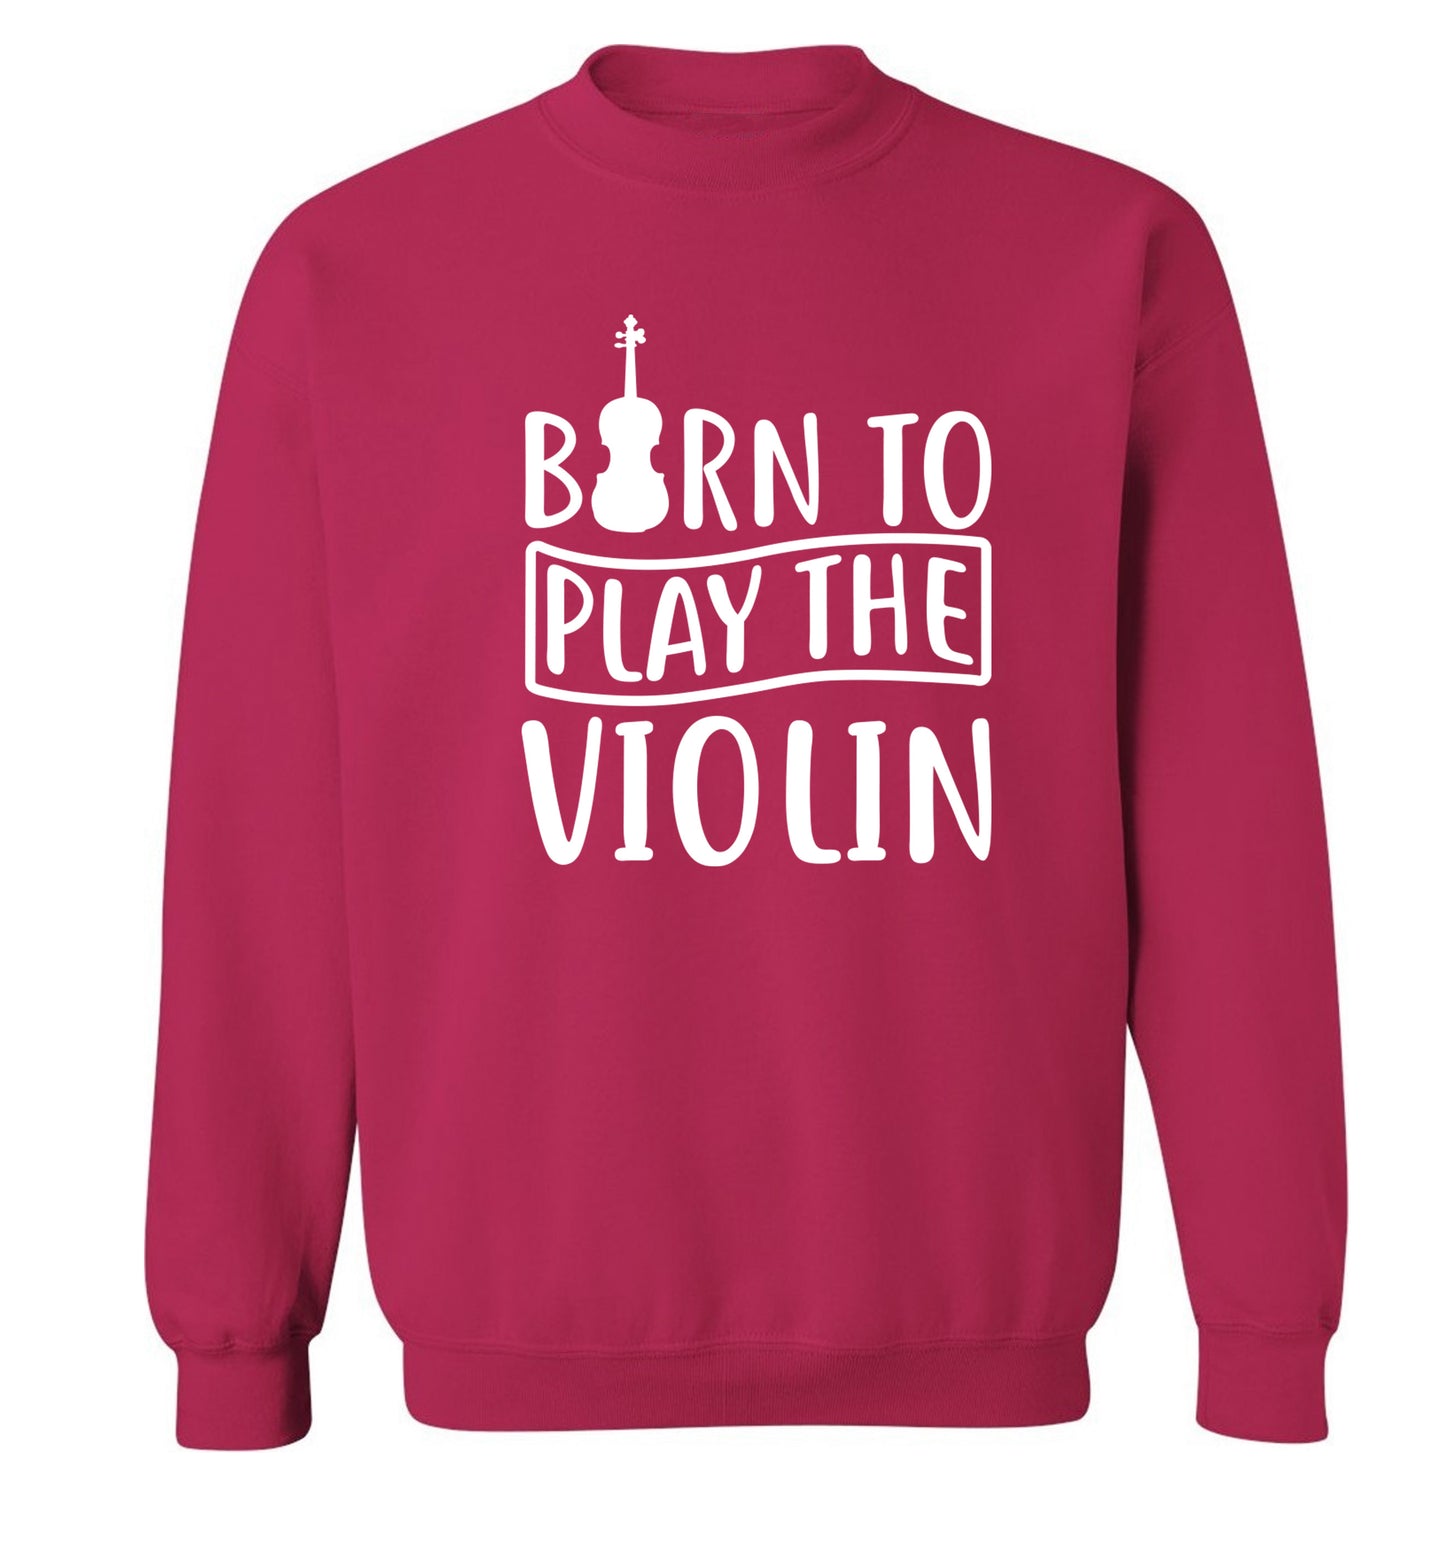 Born to Play the Violin Adult's unisex pink Sweater 2XL